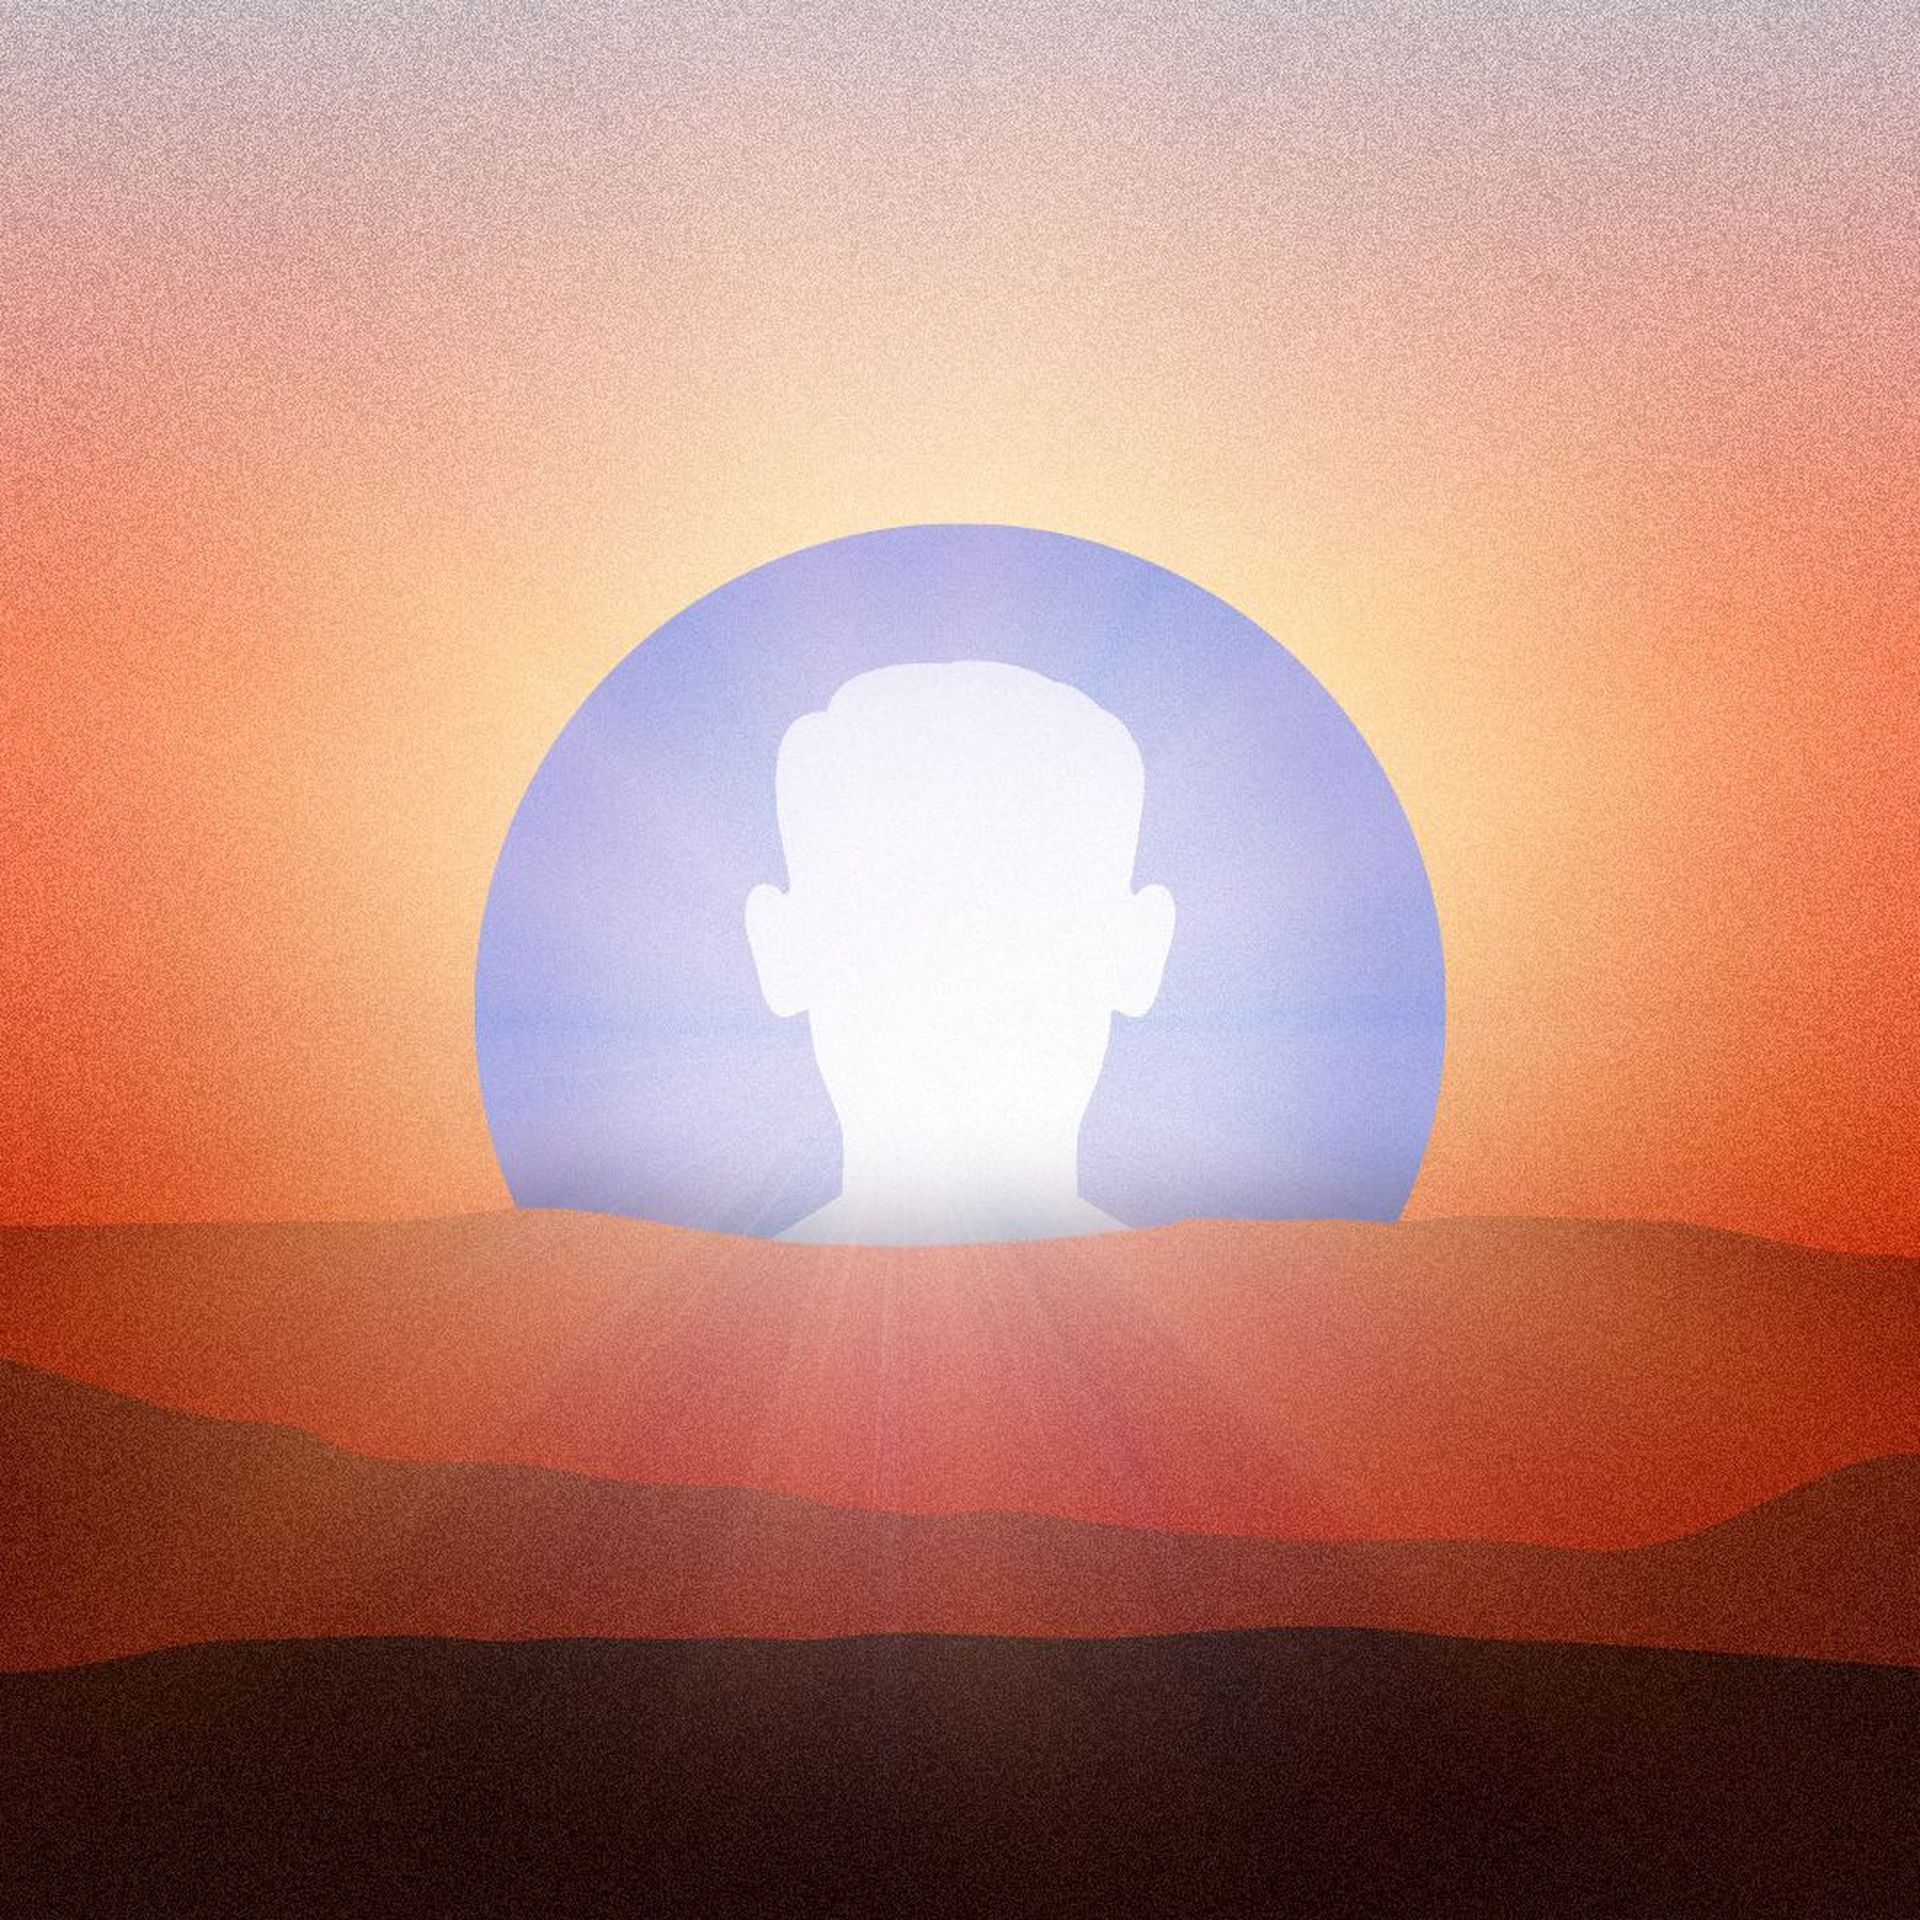 Illustration of a Facebook default profile picture as a setting sun. 